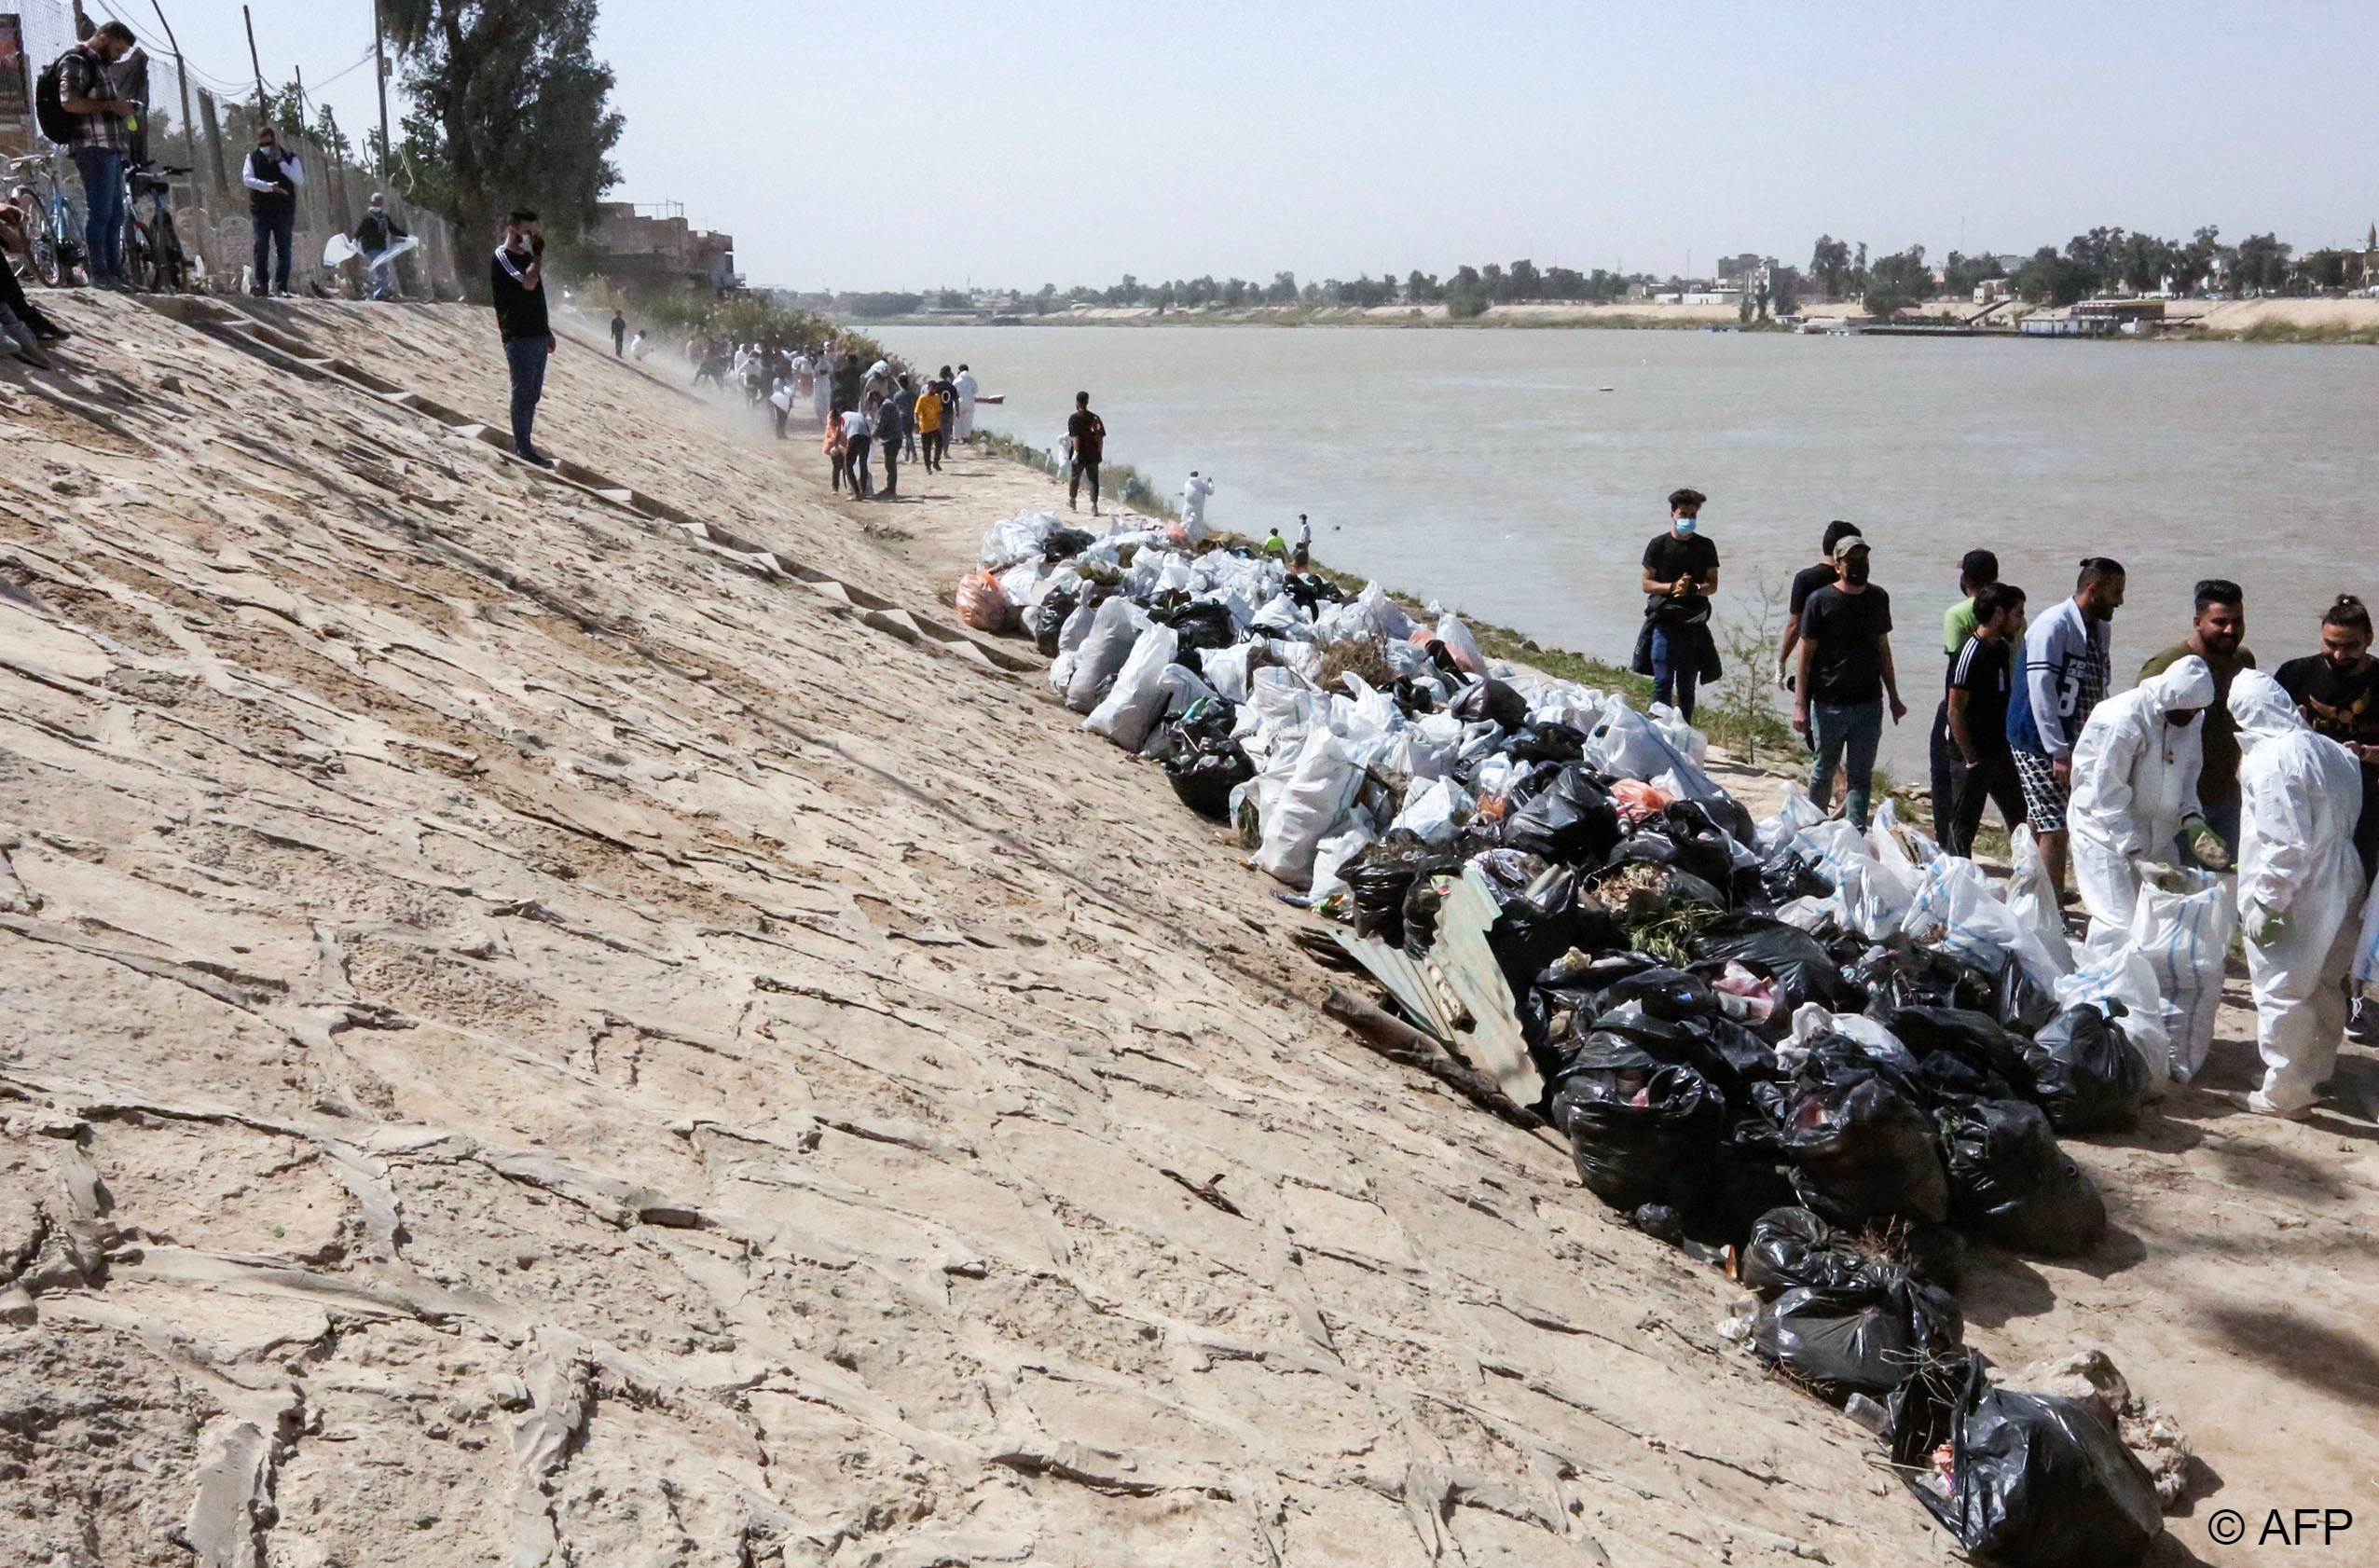 Young Iraqi volunteers take part in a cleanup campaign on the banks of the Tigris River, a rare environmental project in the war-battered country.